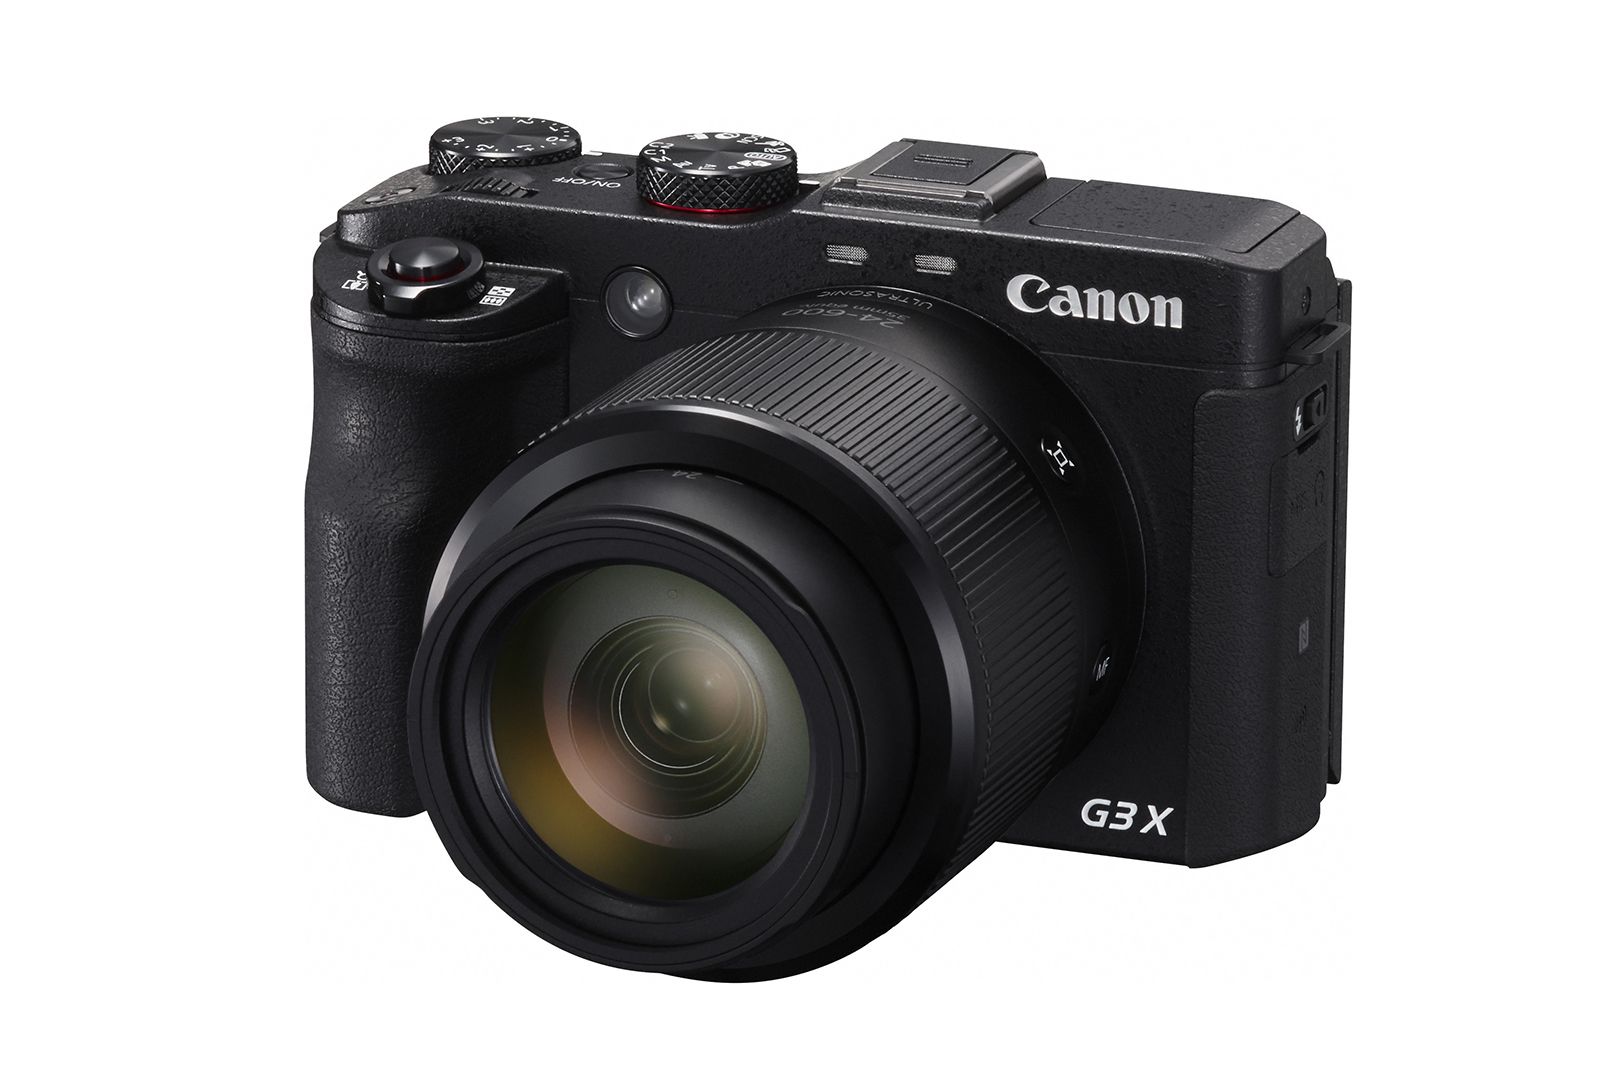 canon powershot g3 x superzoom incoming 1 inch sensor 25x optical zoom compact teased image 1